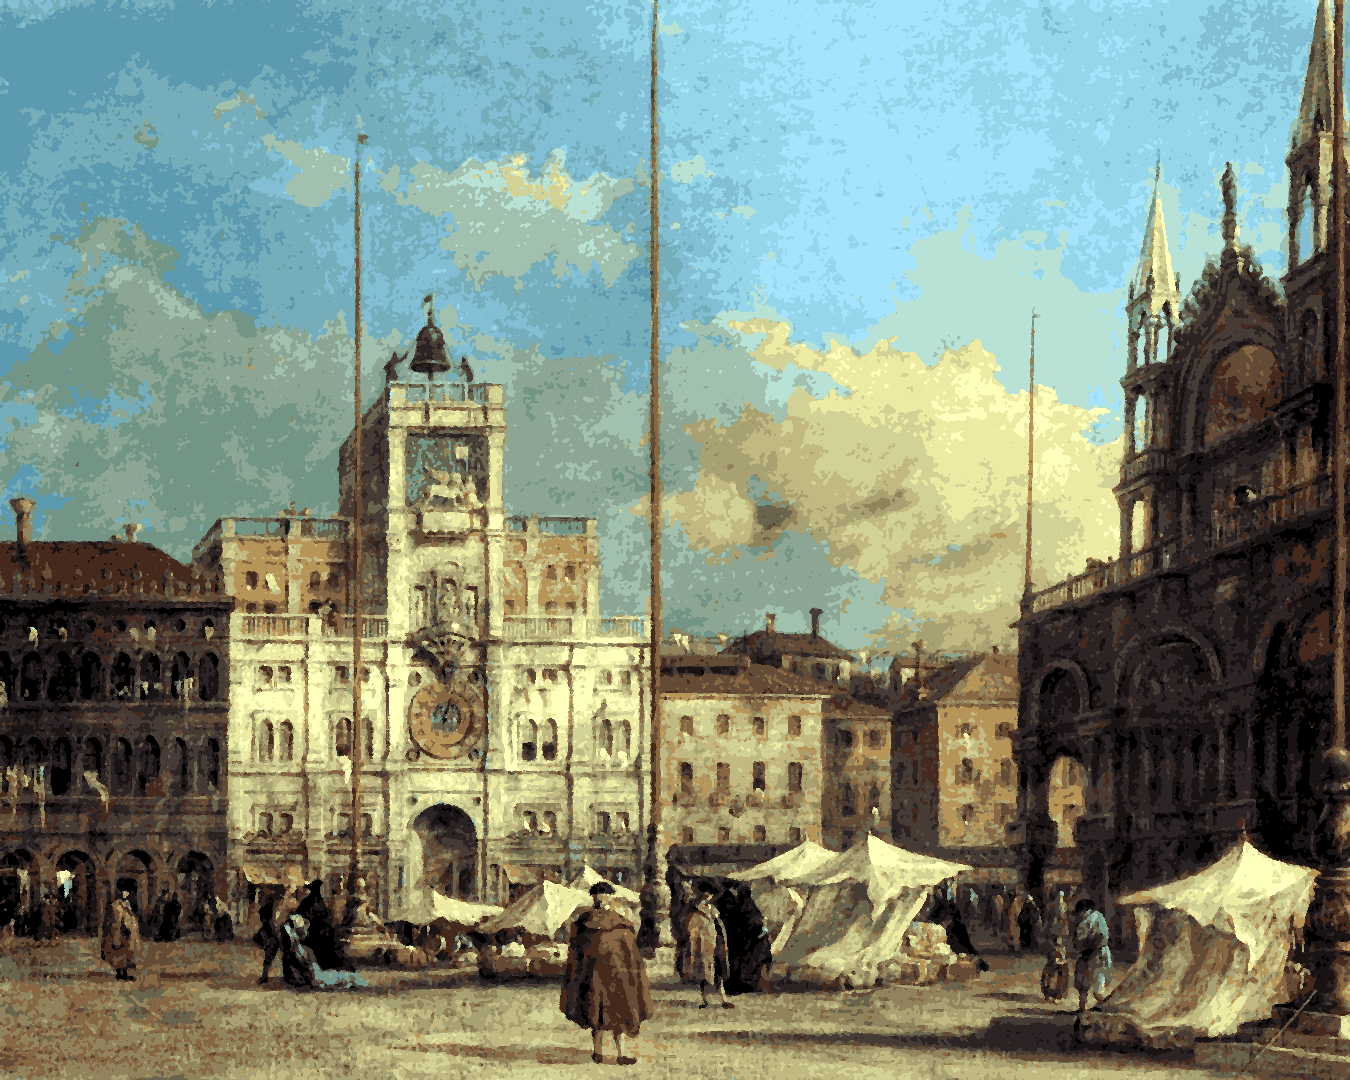 Venice, Italy Collection PD (30) - Piazza San Marco by Francesco Guardi - Van-Go Paint-By-Number Kit